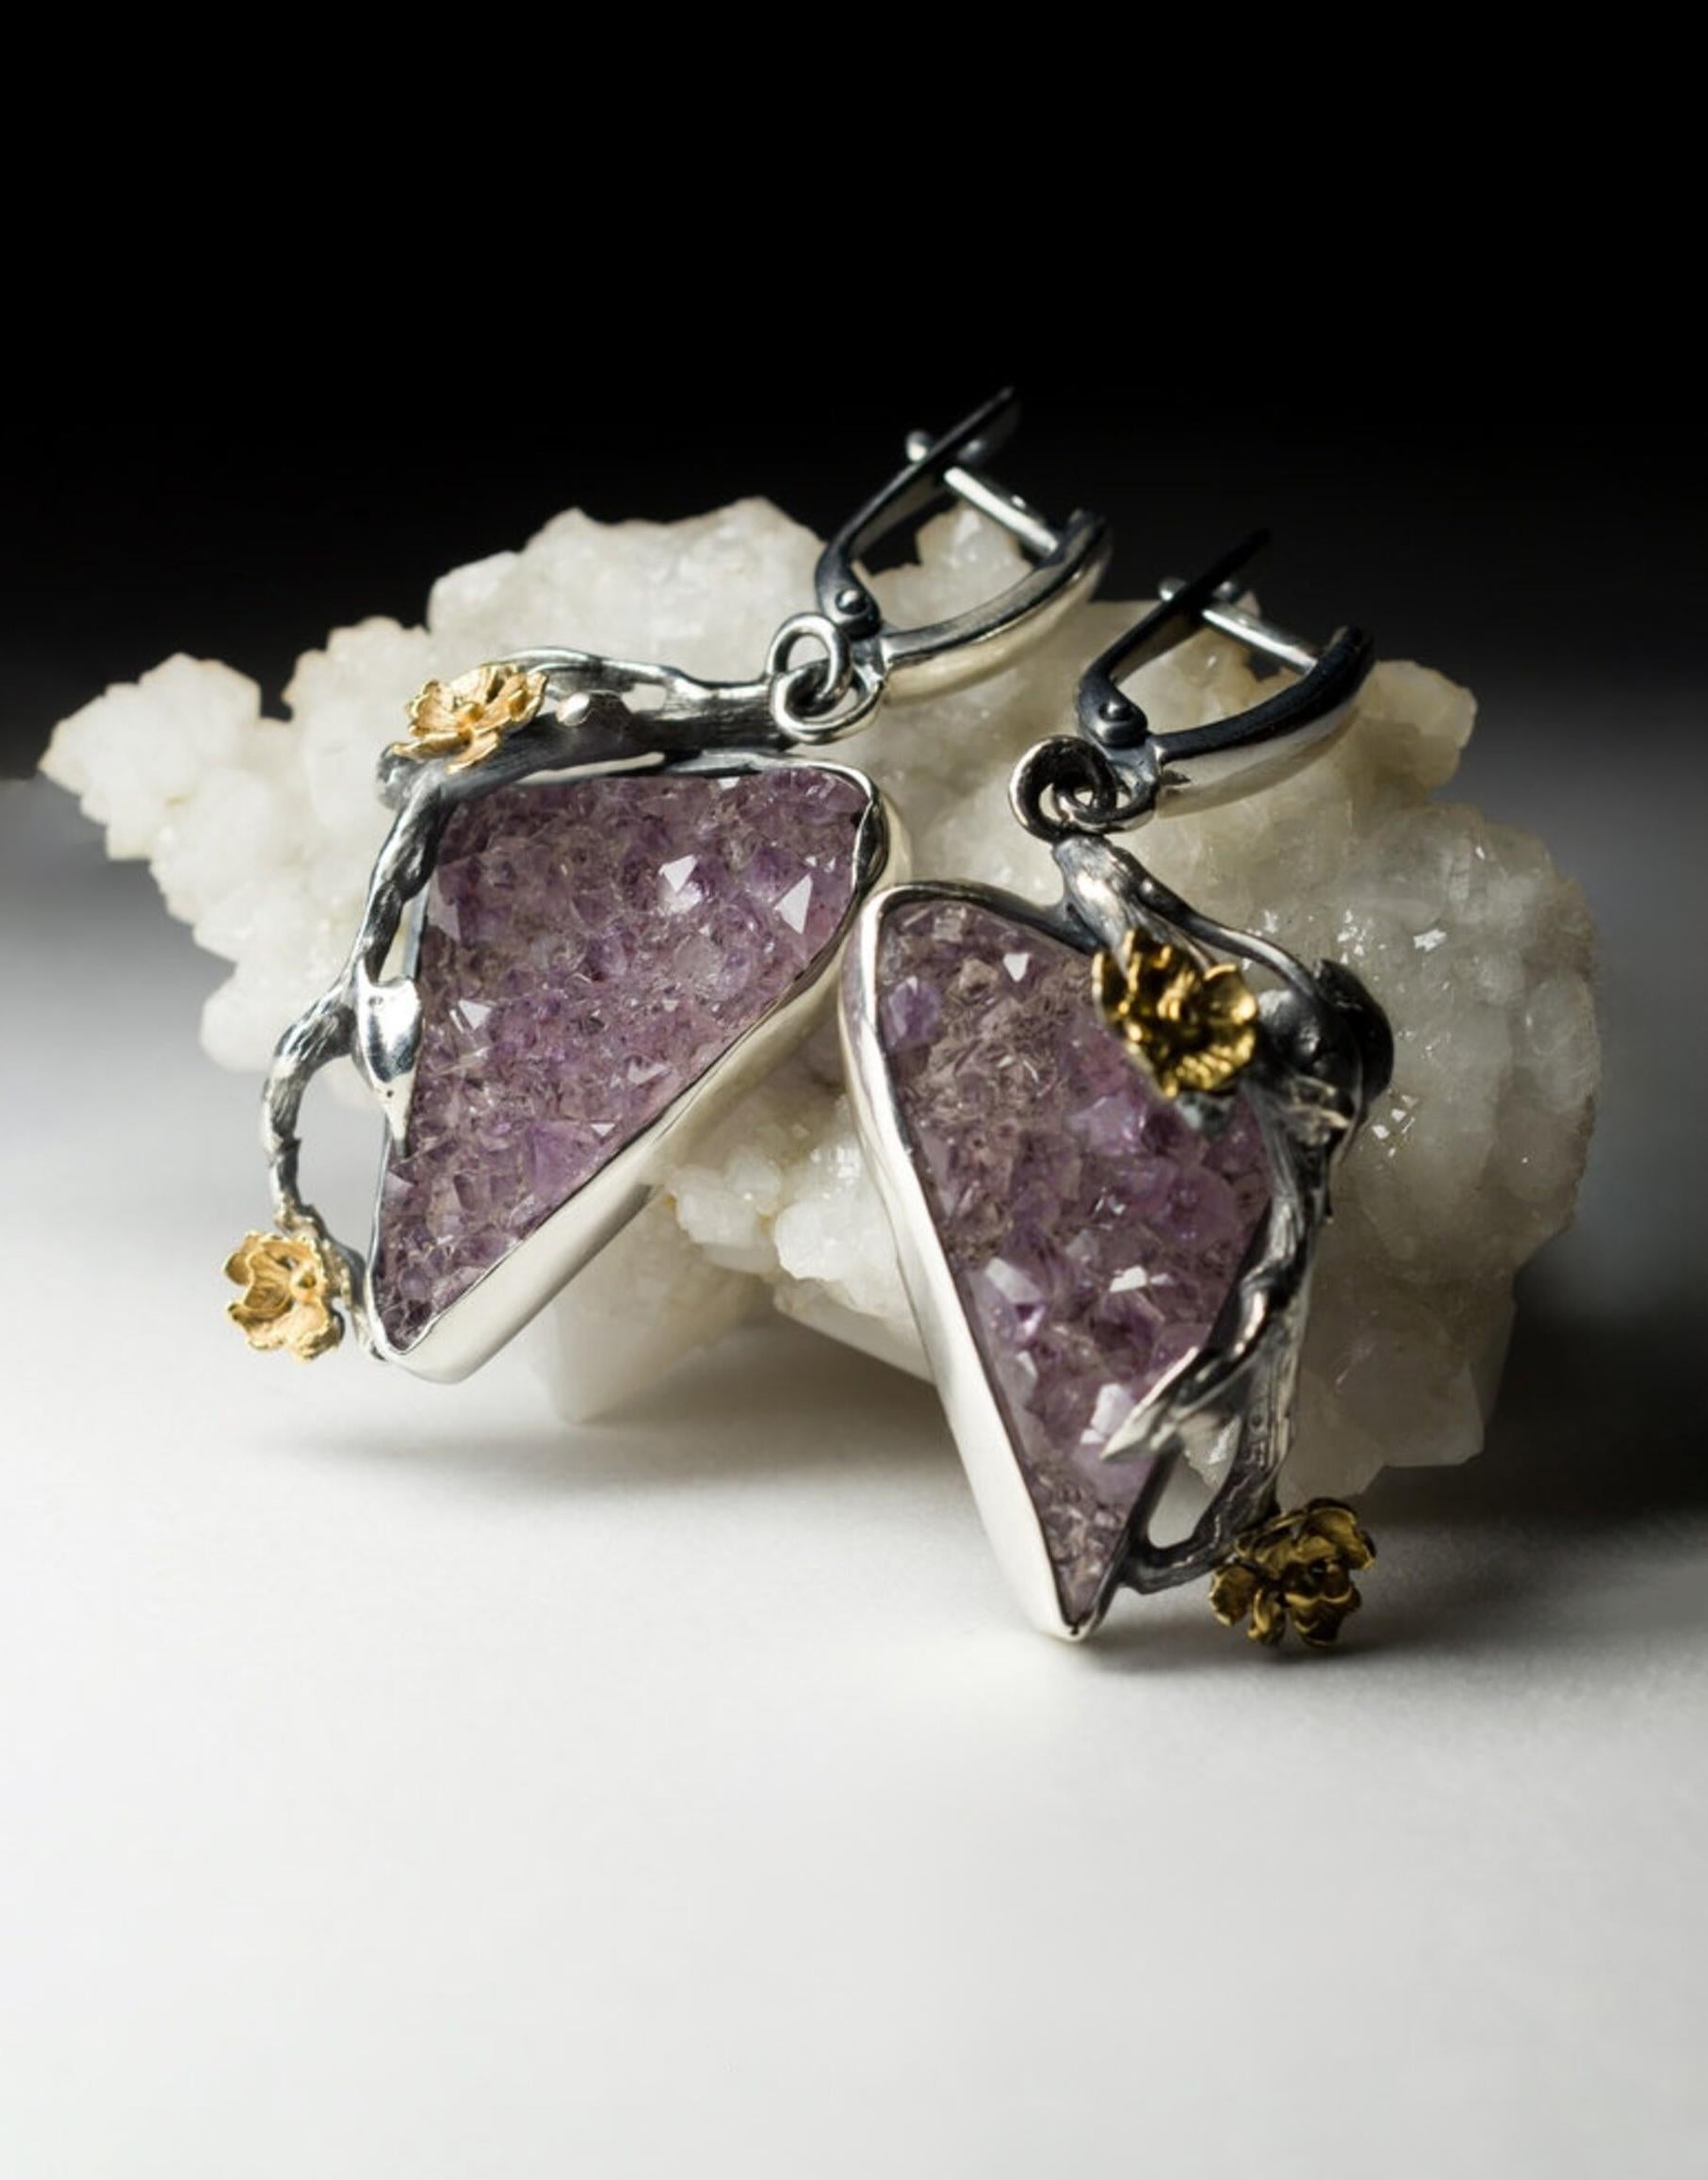 Charming scratched blackened silver earrings with natural Crystals of Amethyst with 18K gold plated
crystal origin - Brazil
earrings weight – 15.2 grams
earrings height - 0.20 in / 50 mm
crystal size is 0.24 x 0.71 x 1.14 in / 6 х 18 х 29 mm